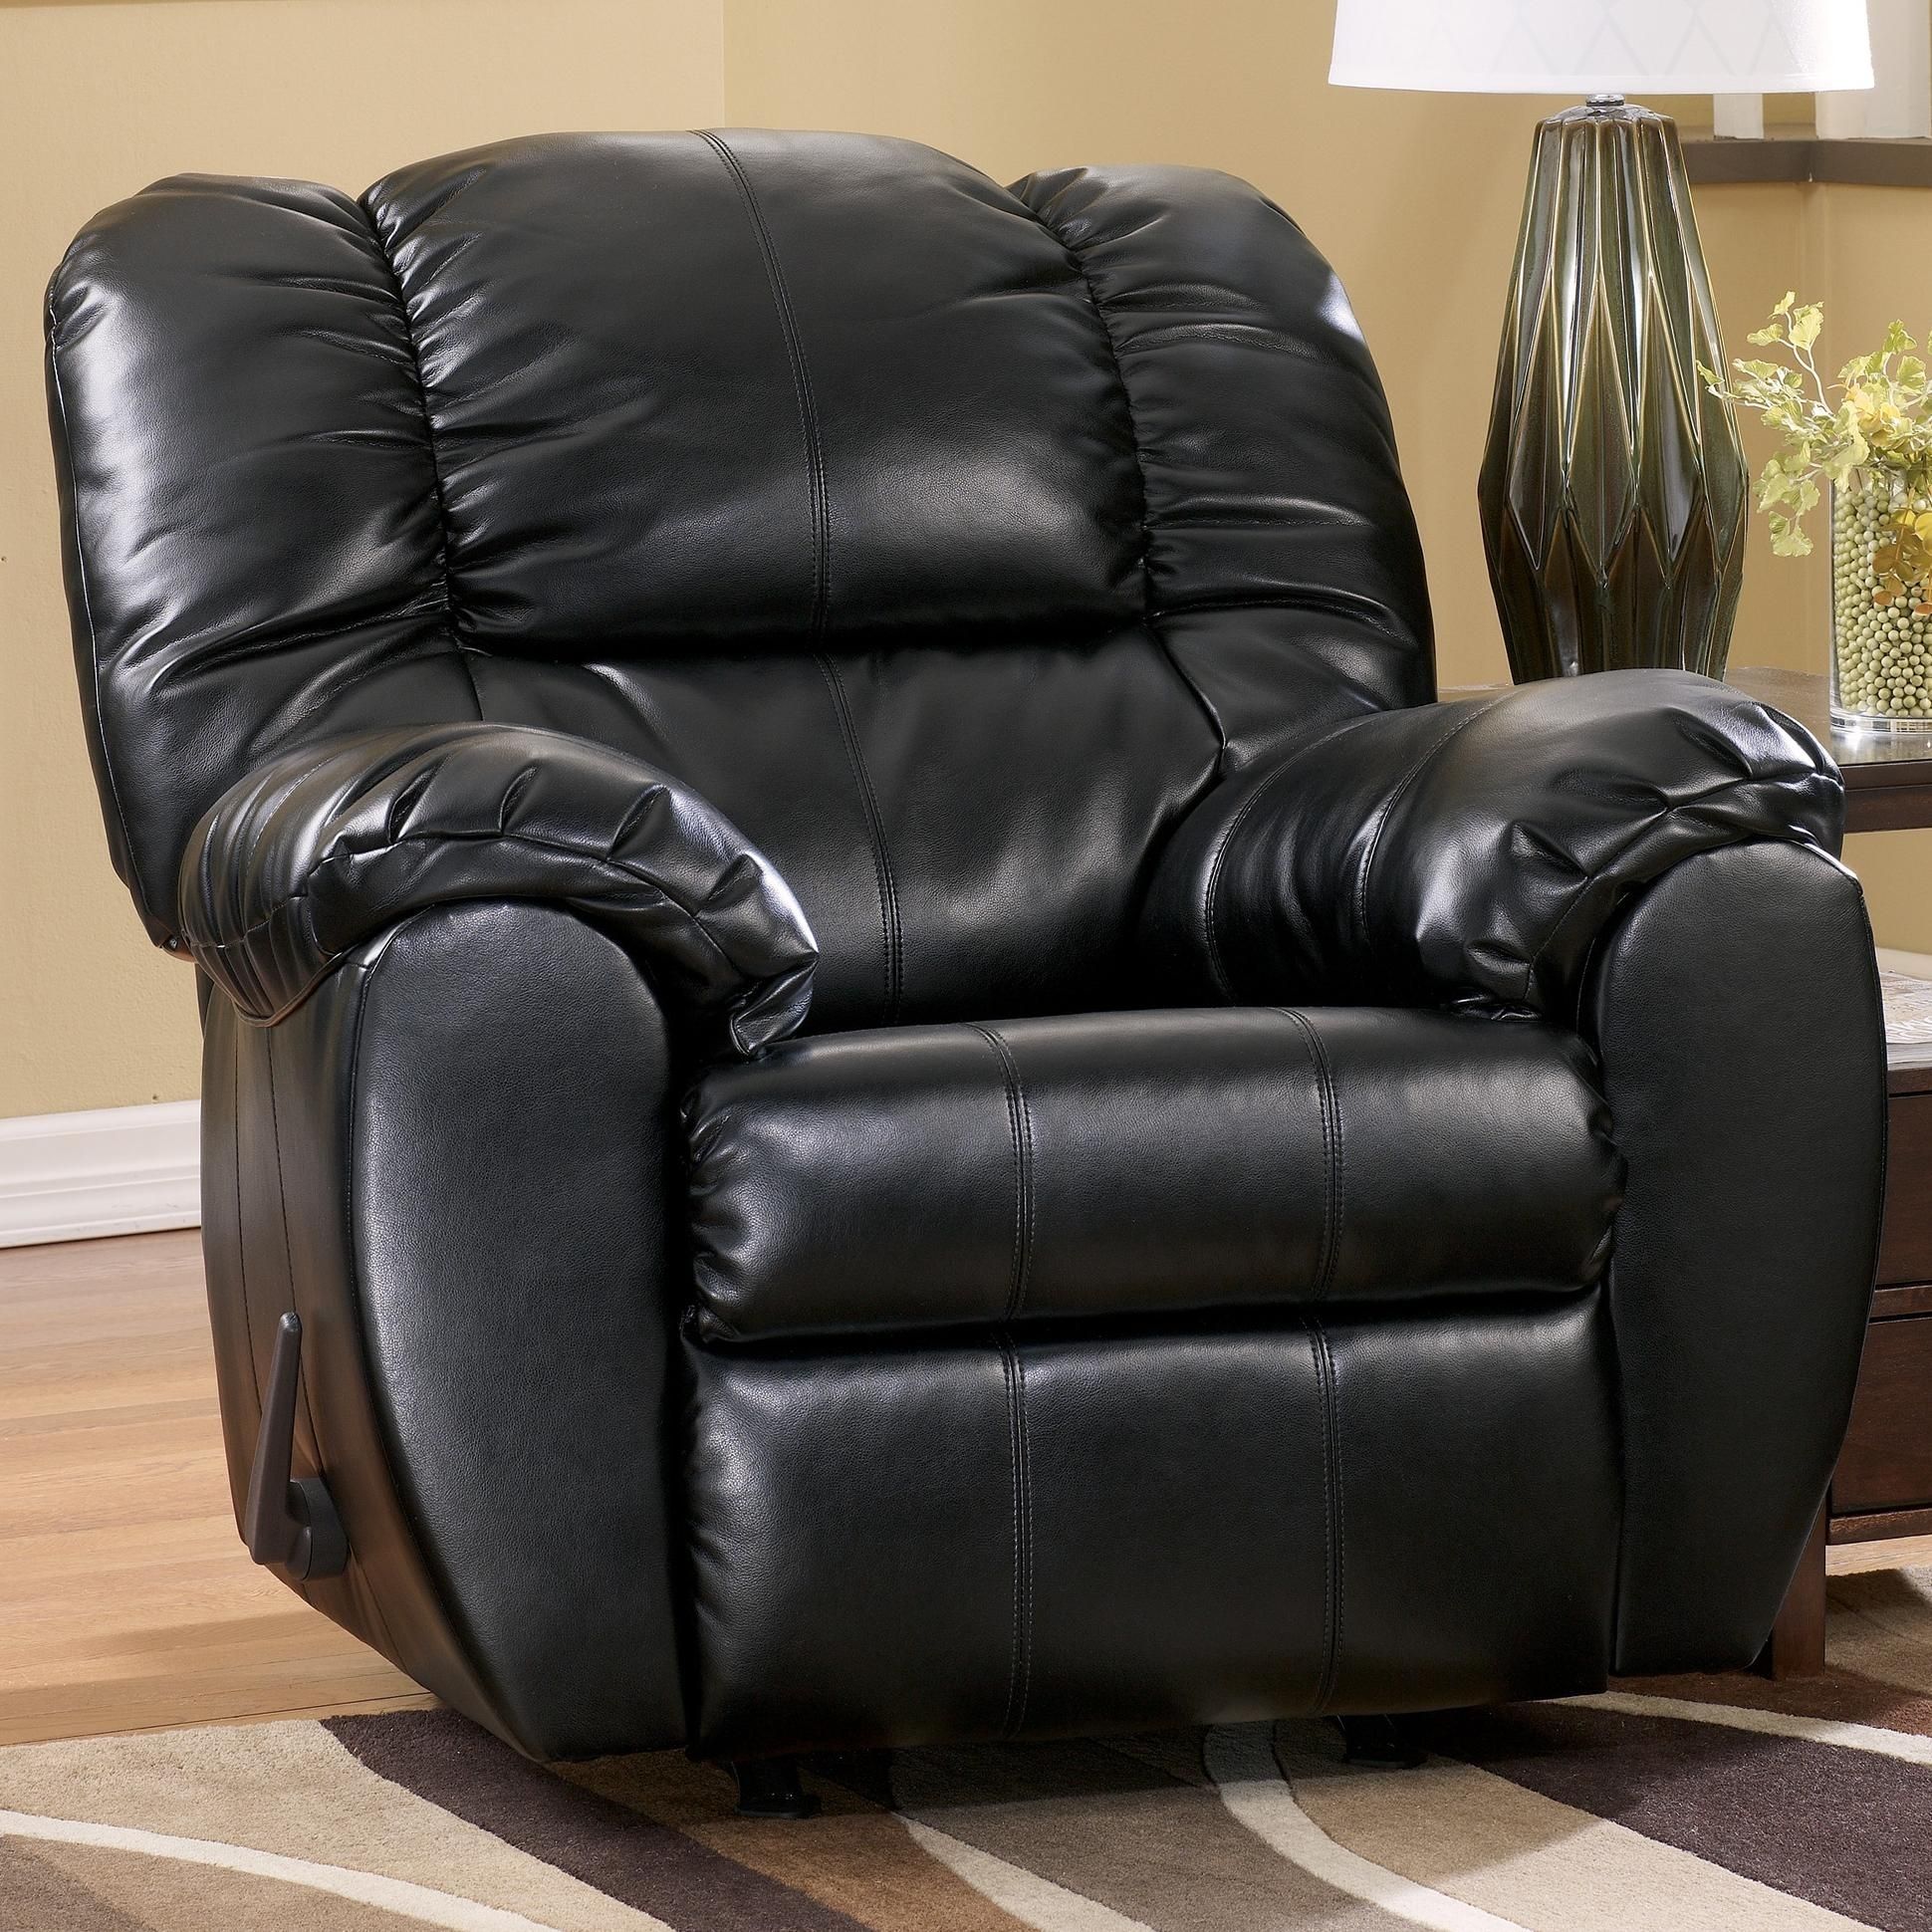 Dylan Durablend – Onyx Bonded Leather Match Rocker Recliner Pertaining To Declan 3 Piece Power Reclining Sectionals With Right Facing Console Loveseat (View 5 of 25)